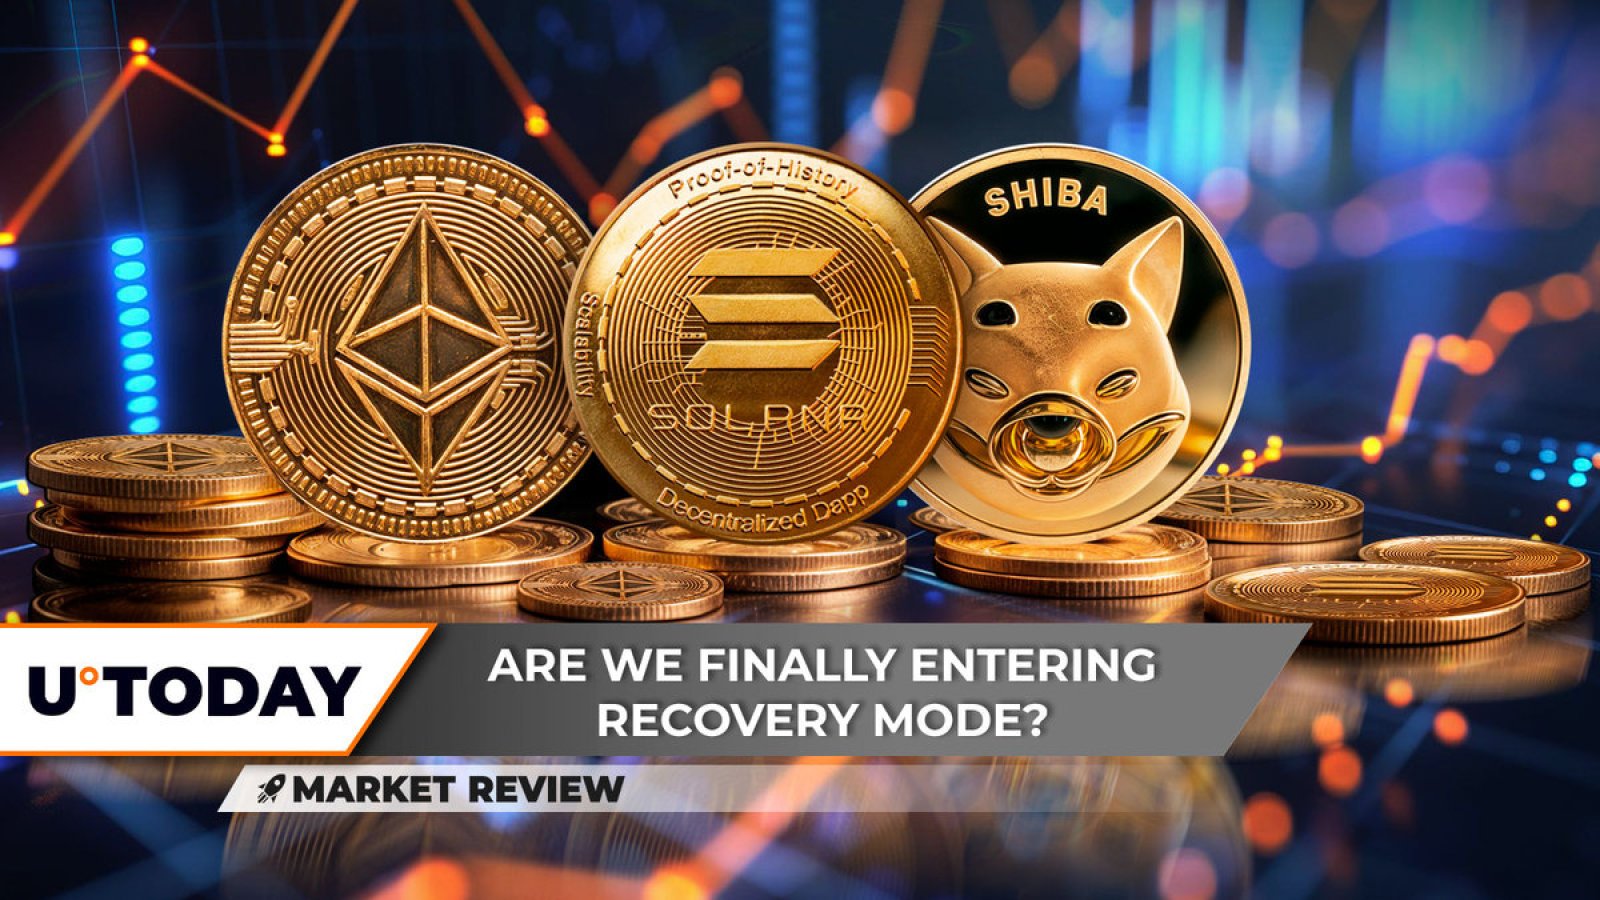 Ethereum (ETH) Bounce From $3,400 Imminent? Solana (SOL) Reversal Started: Here's Next Target, What's Happening With Shiba Inu (SHIB)?